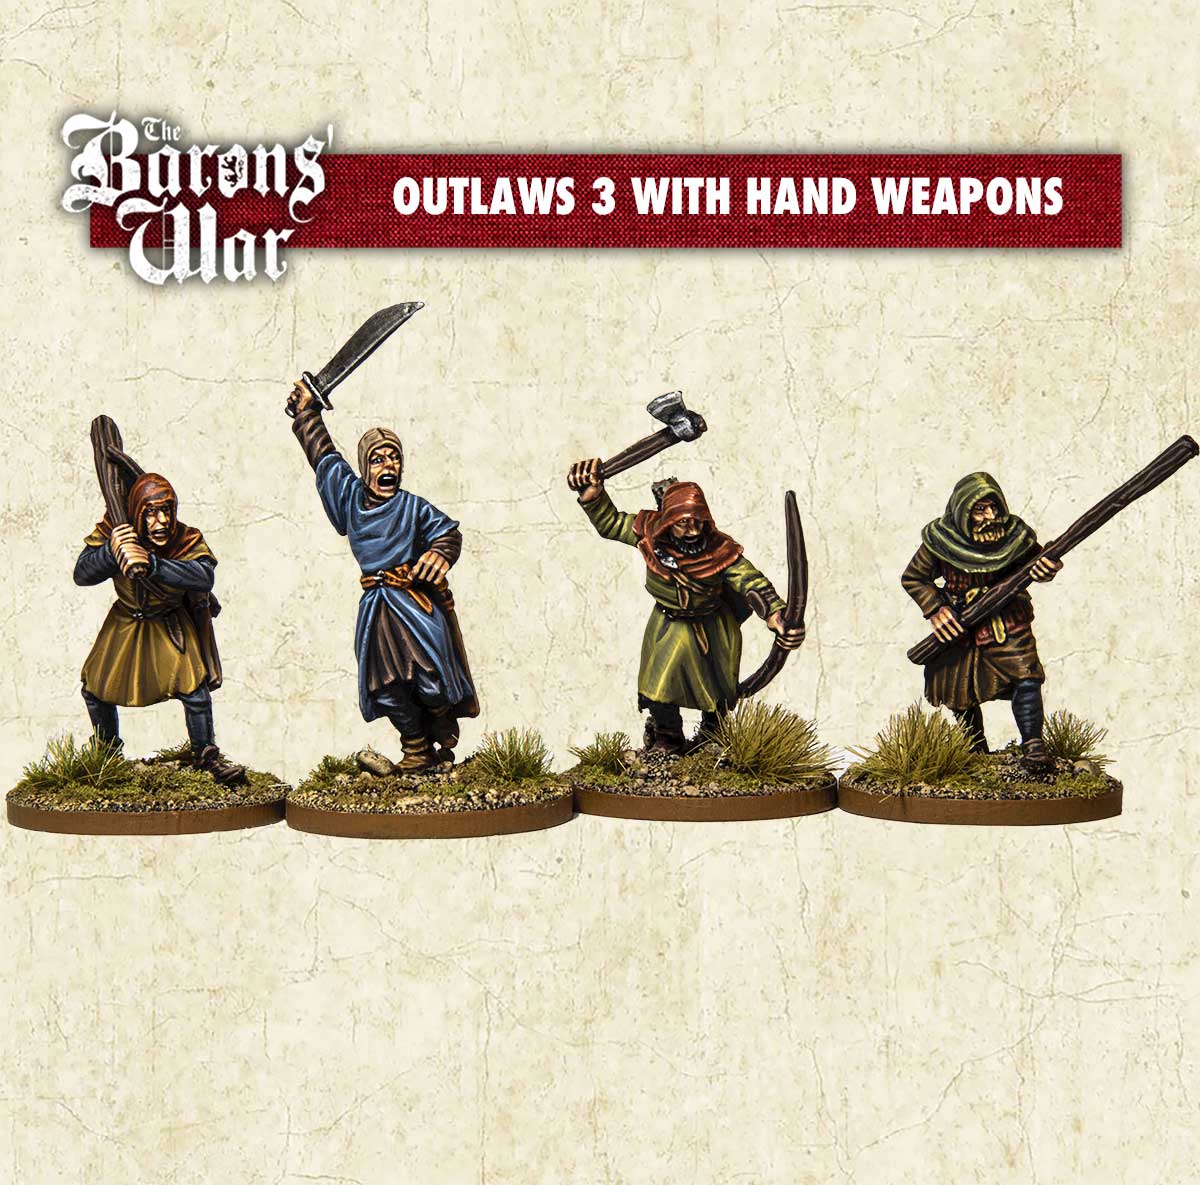 Baron's War Outlaws 3 with hand weapons 28mm historical miniatures